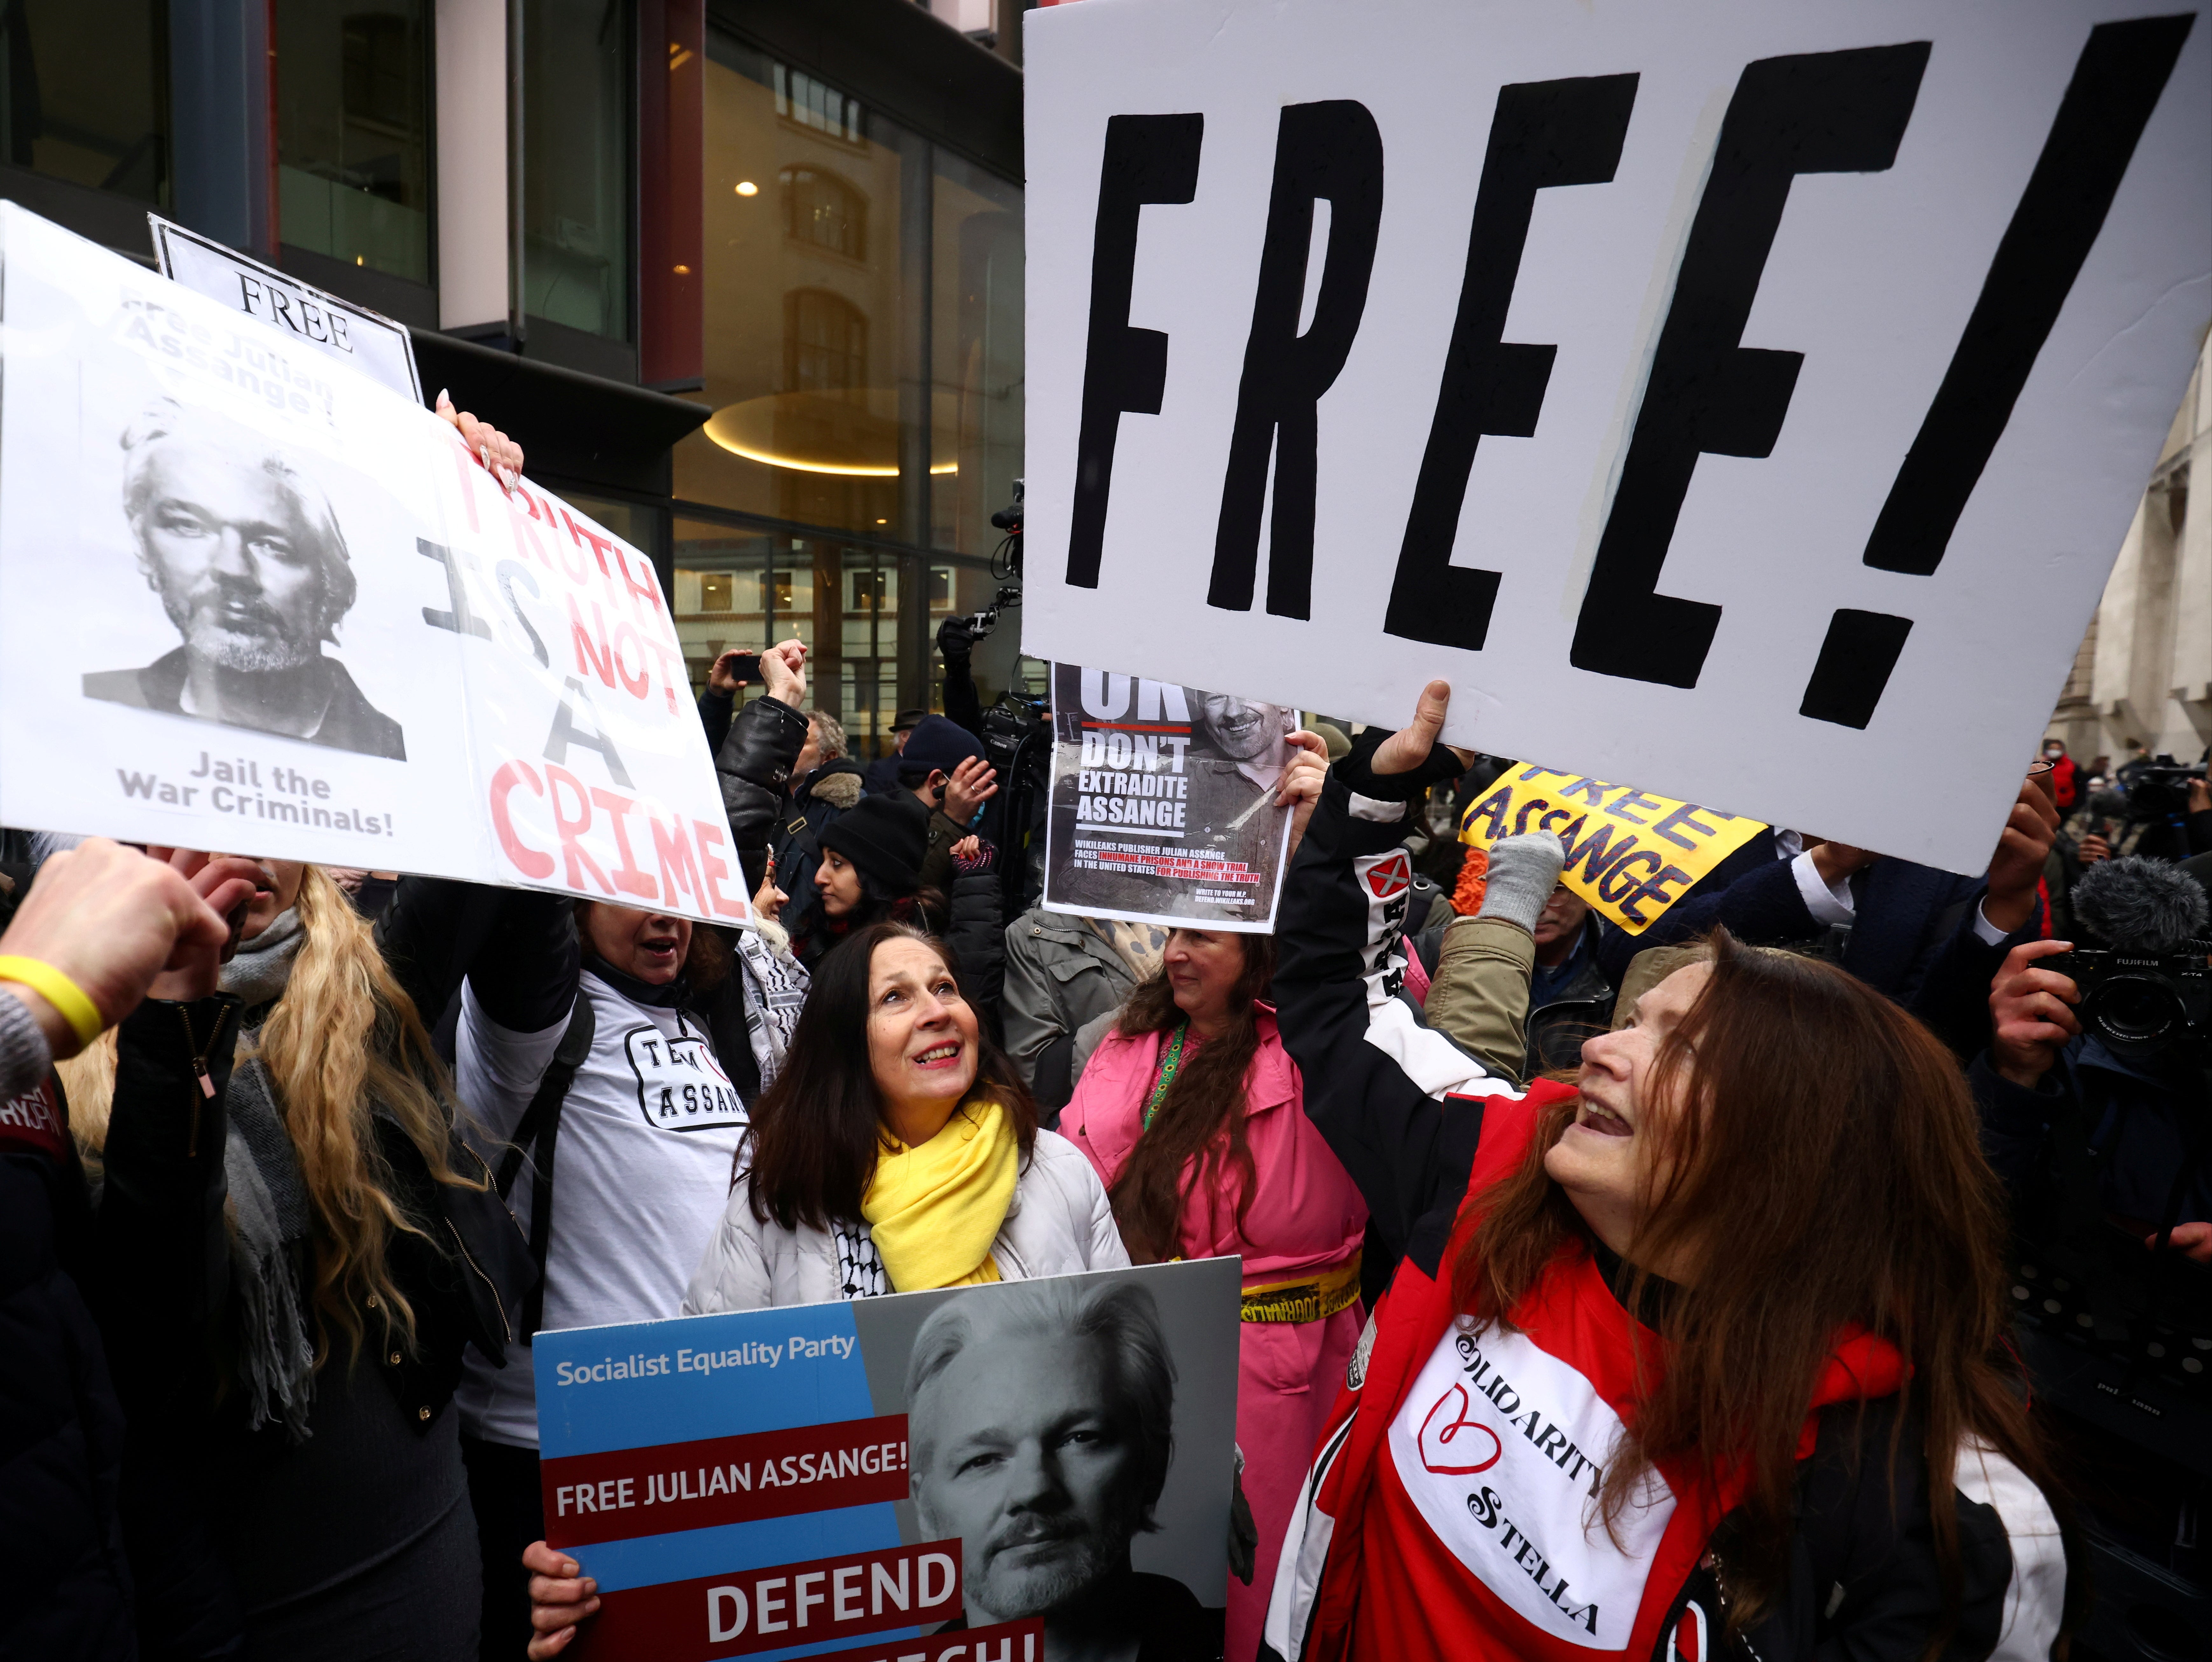 People celebrate after a judge ruled that WikiLeaks founder Julian Assange should not be extradited to the United States, outside the Old Bailey in London, Britain, January 4, 2021.